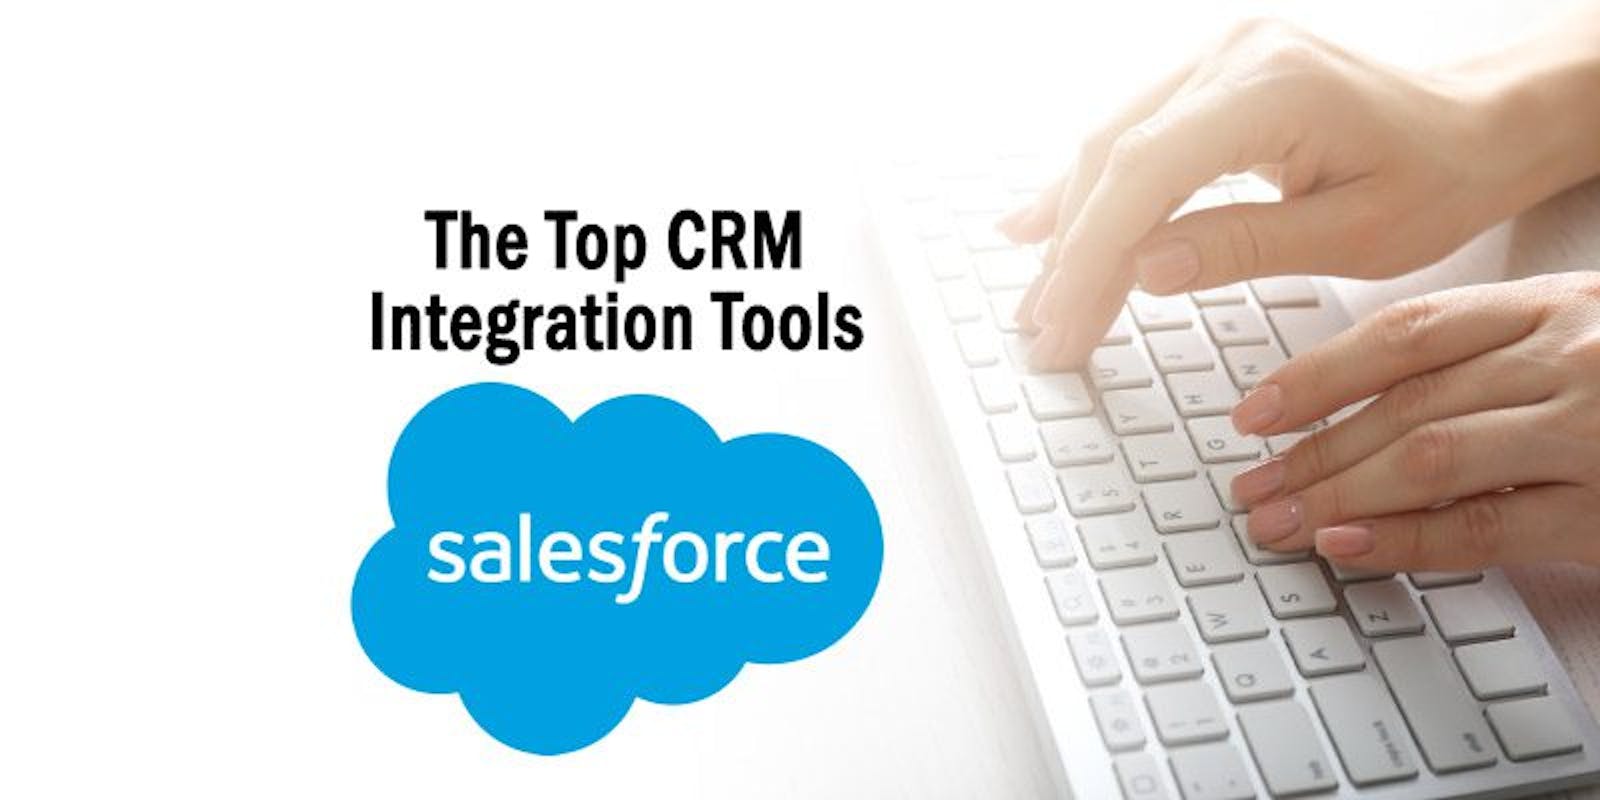 "Connecting the Dots: Salesforce Integration with Various Systems"